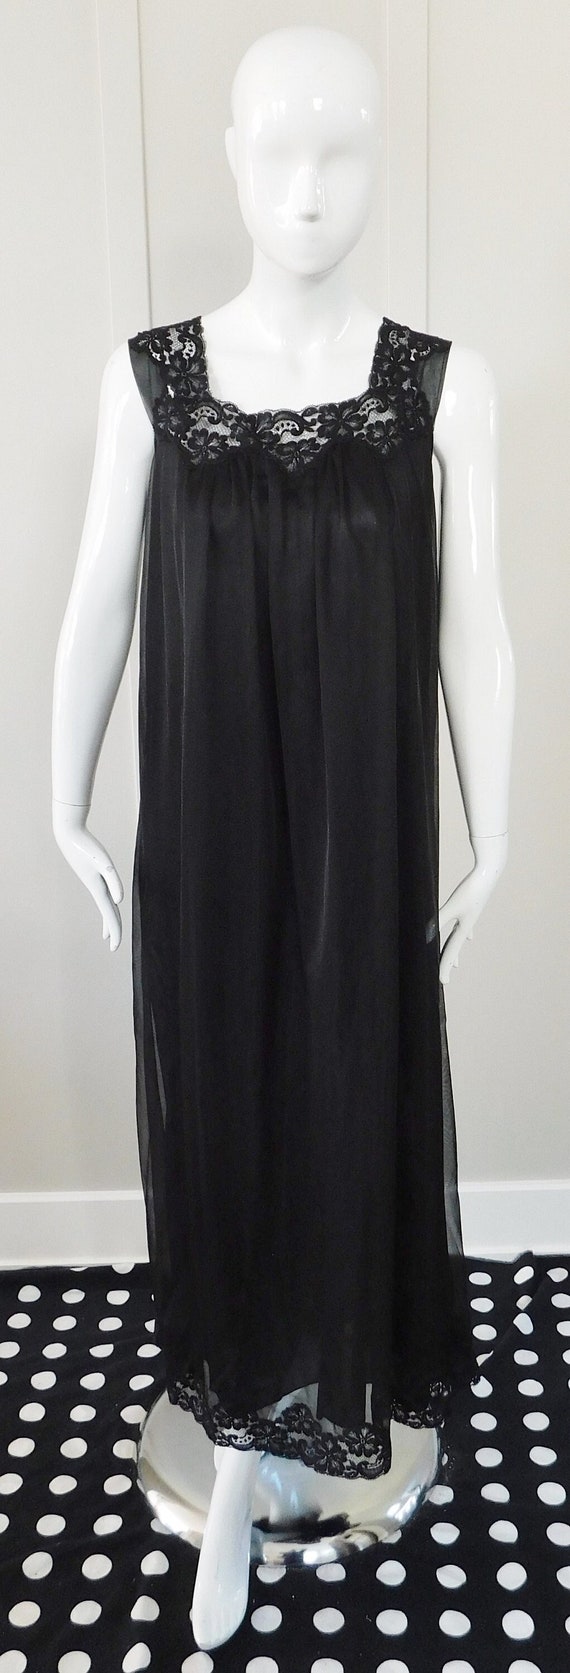 1960's Vintage French Maid Square Neck Nightgown - image 1